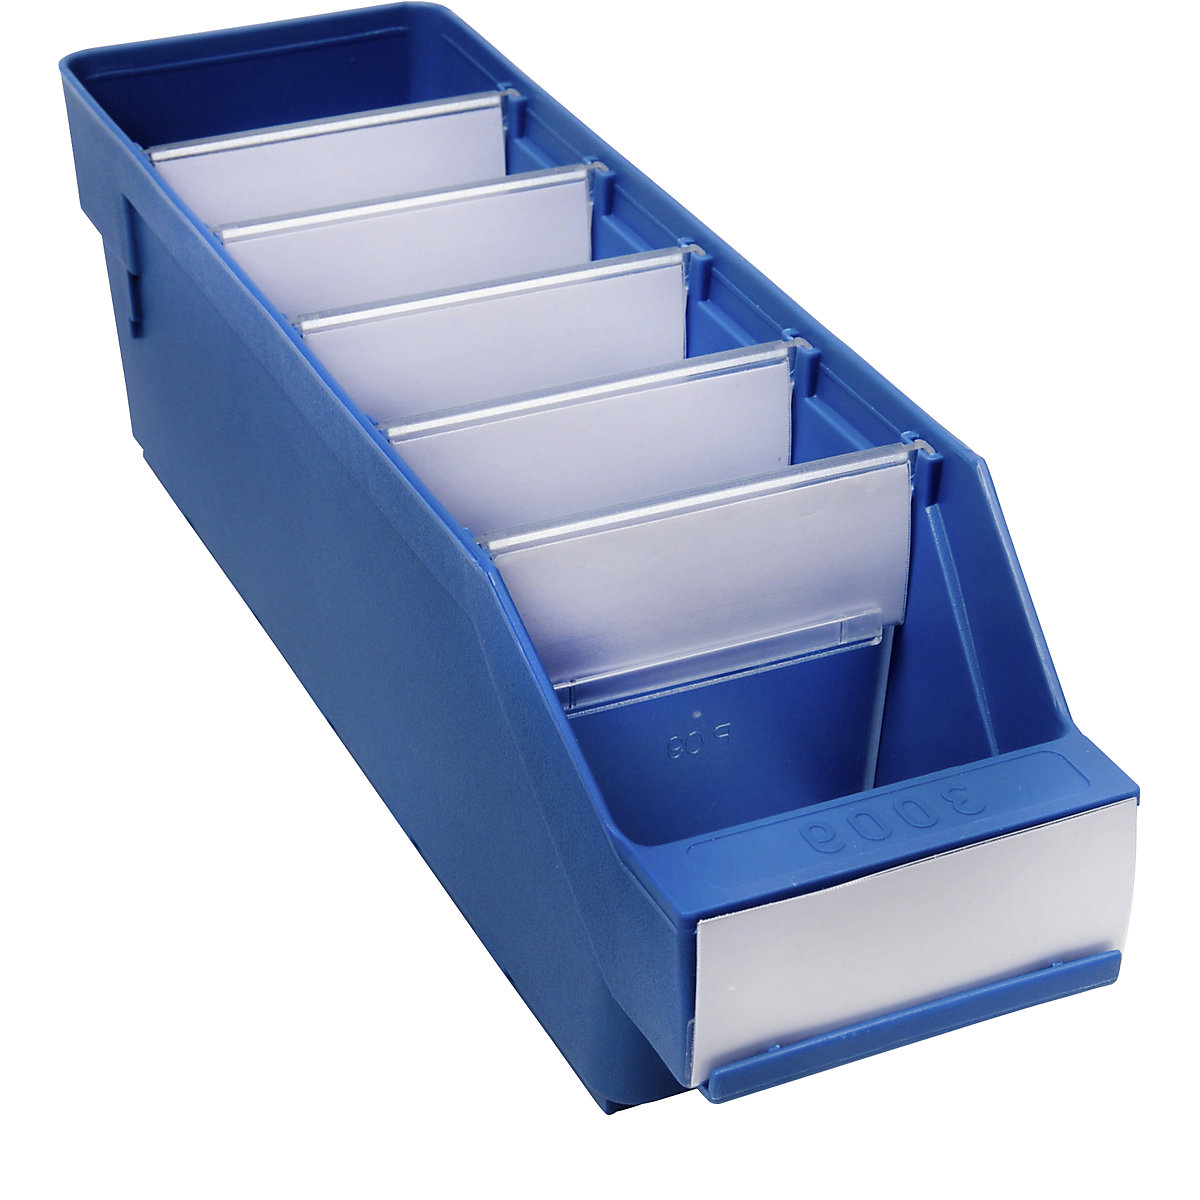 Shelf bin made of highly impact resistant polypropylene – STEMO, blue, LxWxH 300 x 90 x 95 mm, pack of 40-5